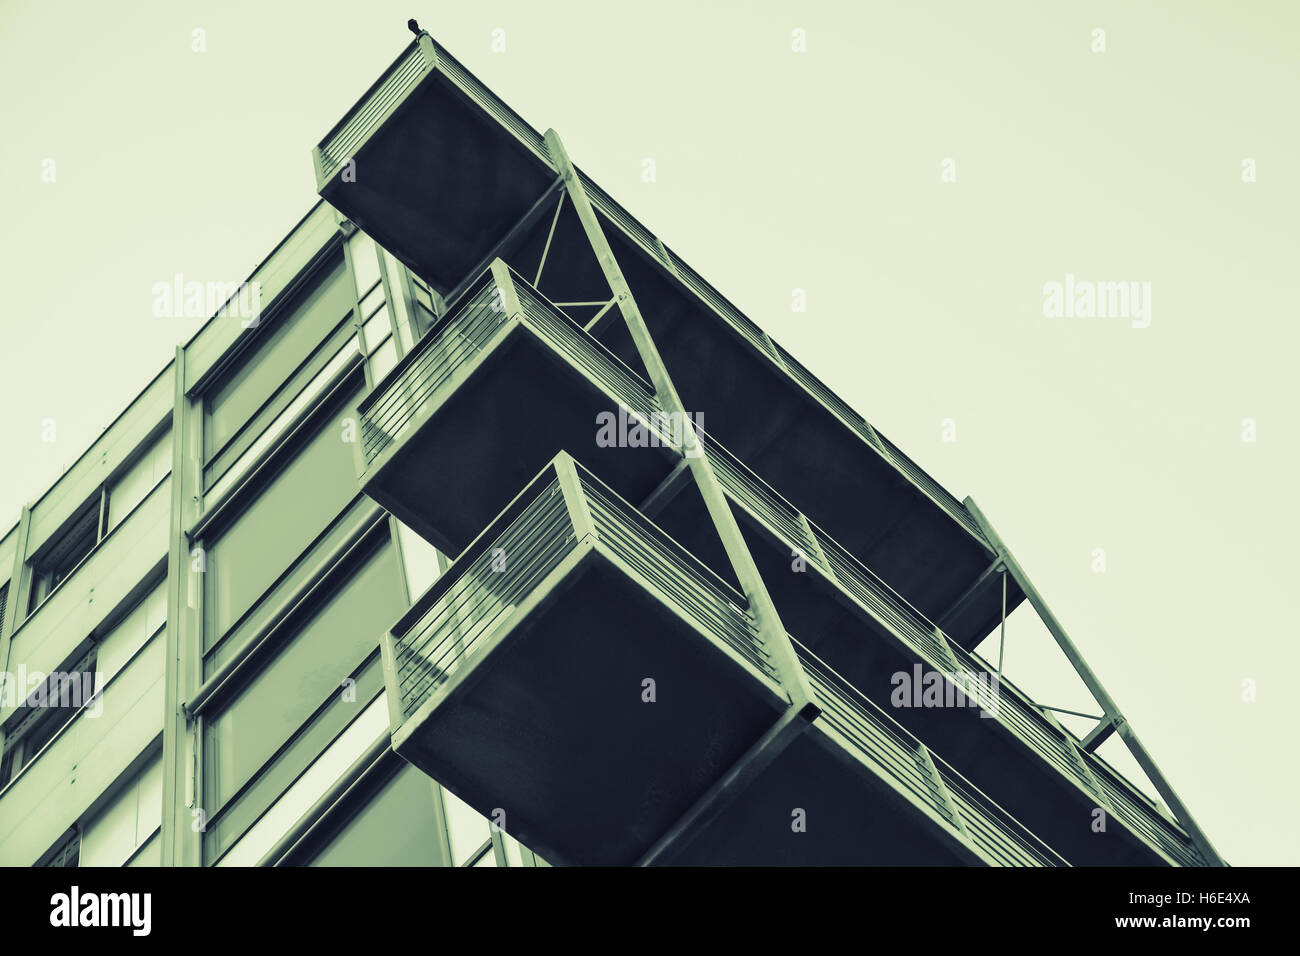 Abstract contemporary architecture fragment, walls and balconies made of glass and concrete. Green tonal correction filter effec Stock Photo